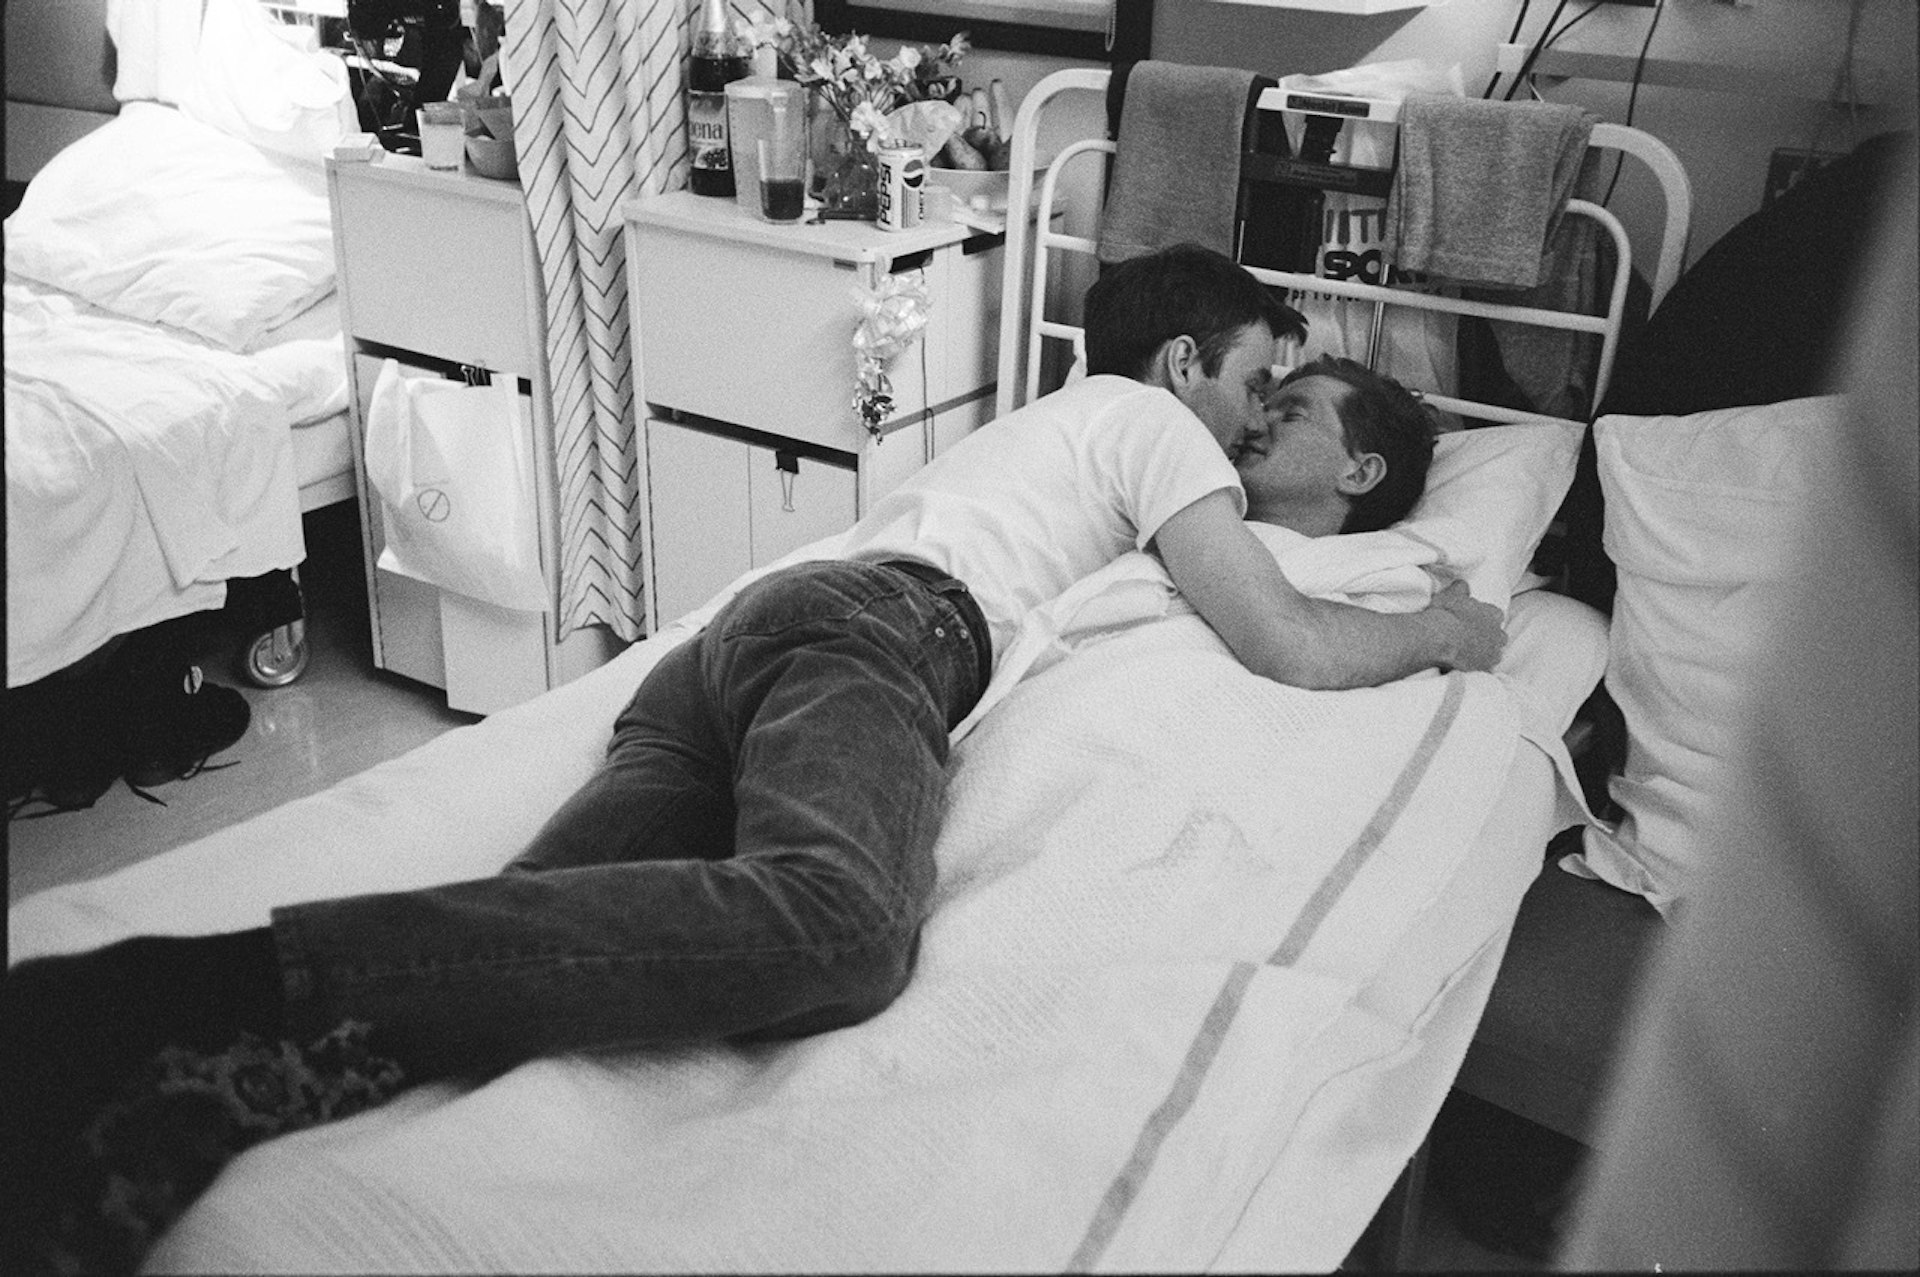 The humanity of the AIDS crisis captured on film